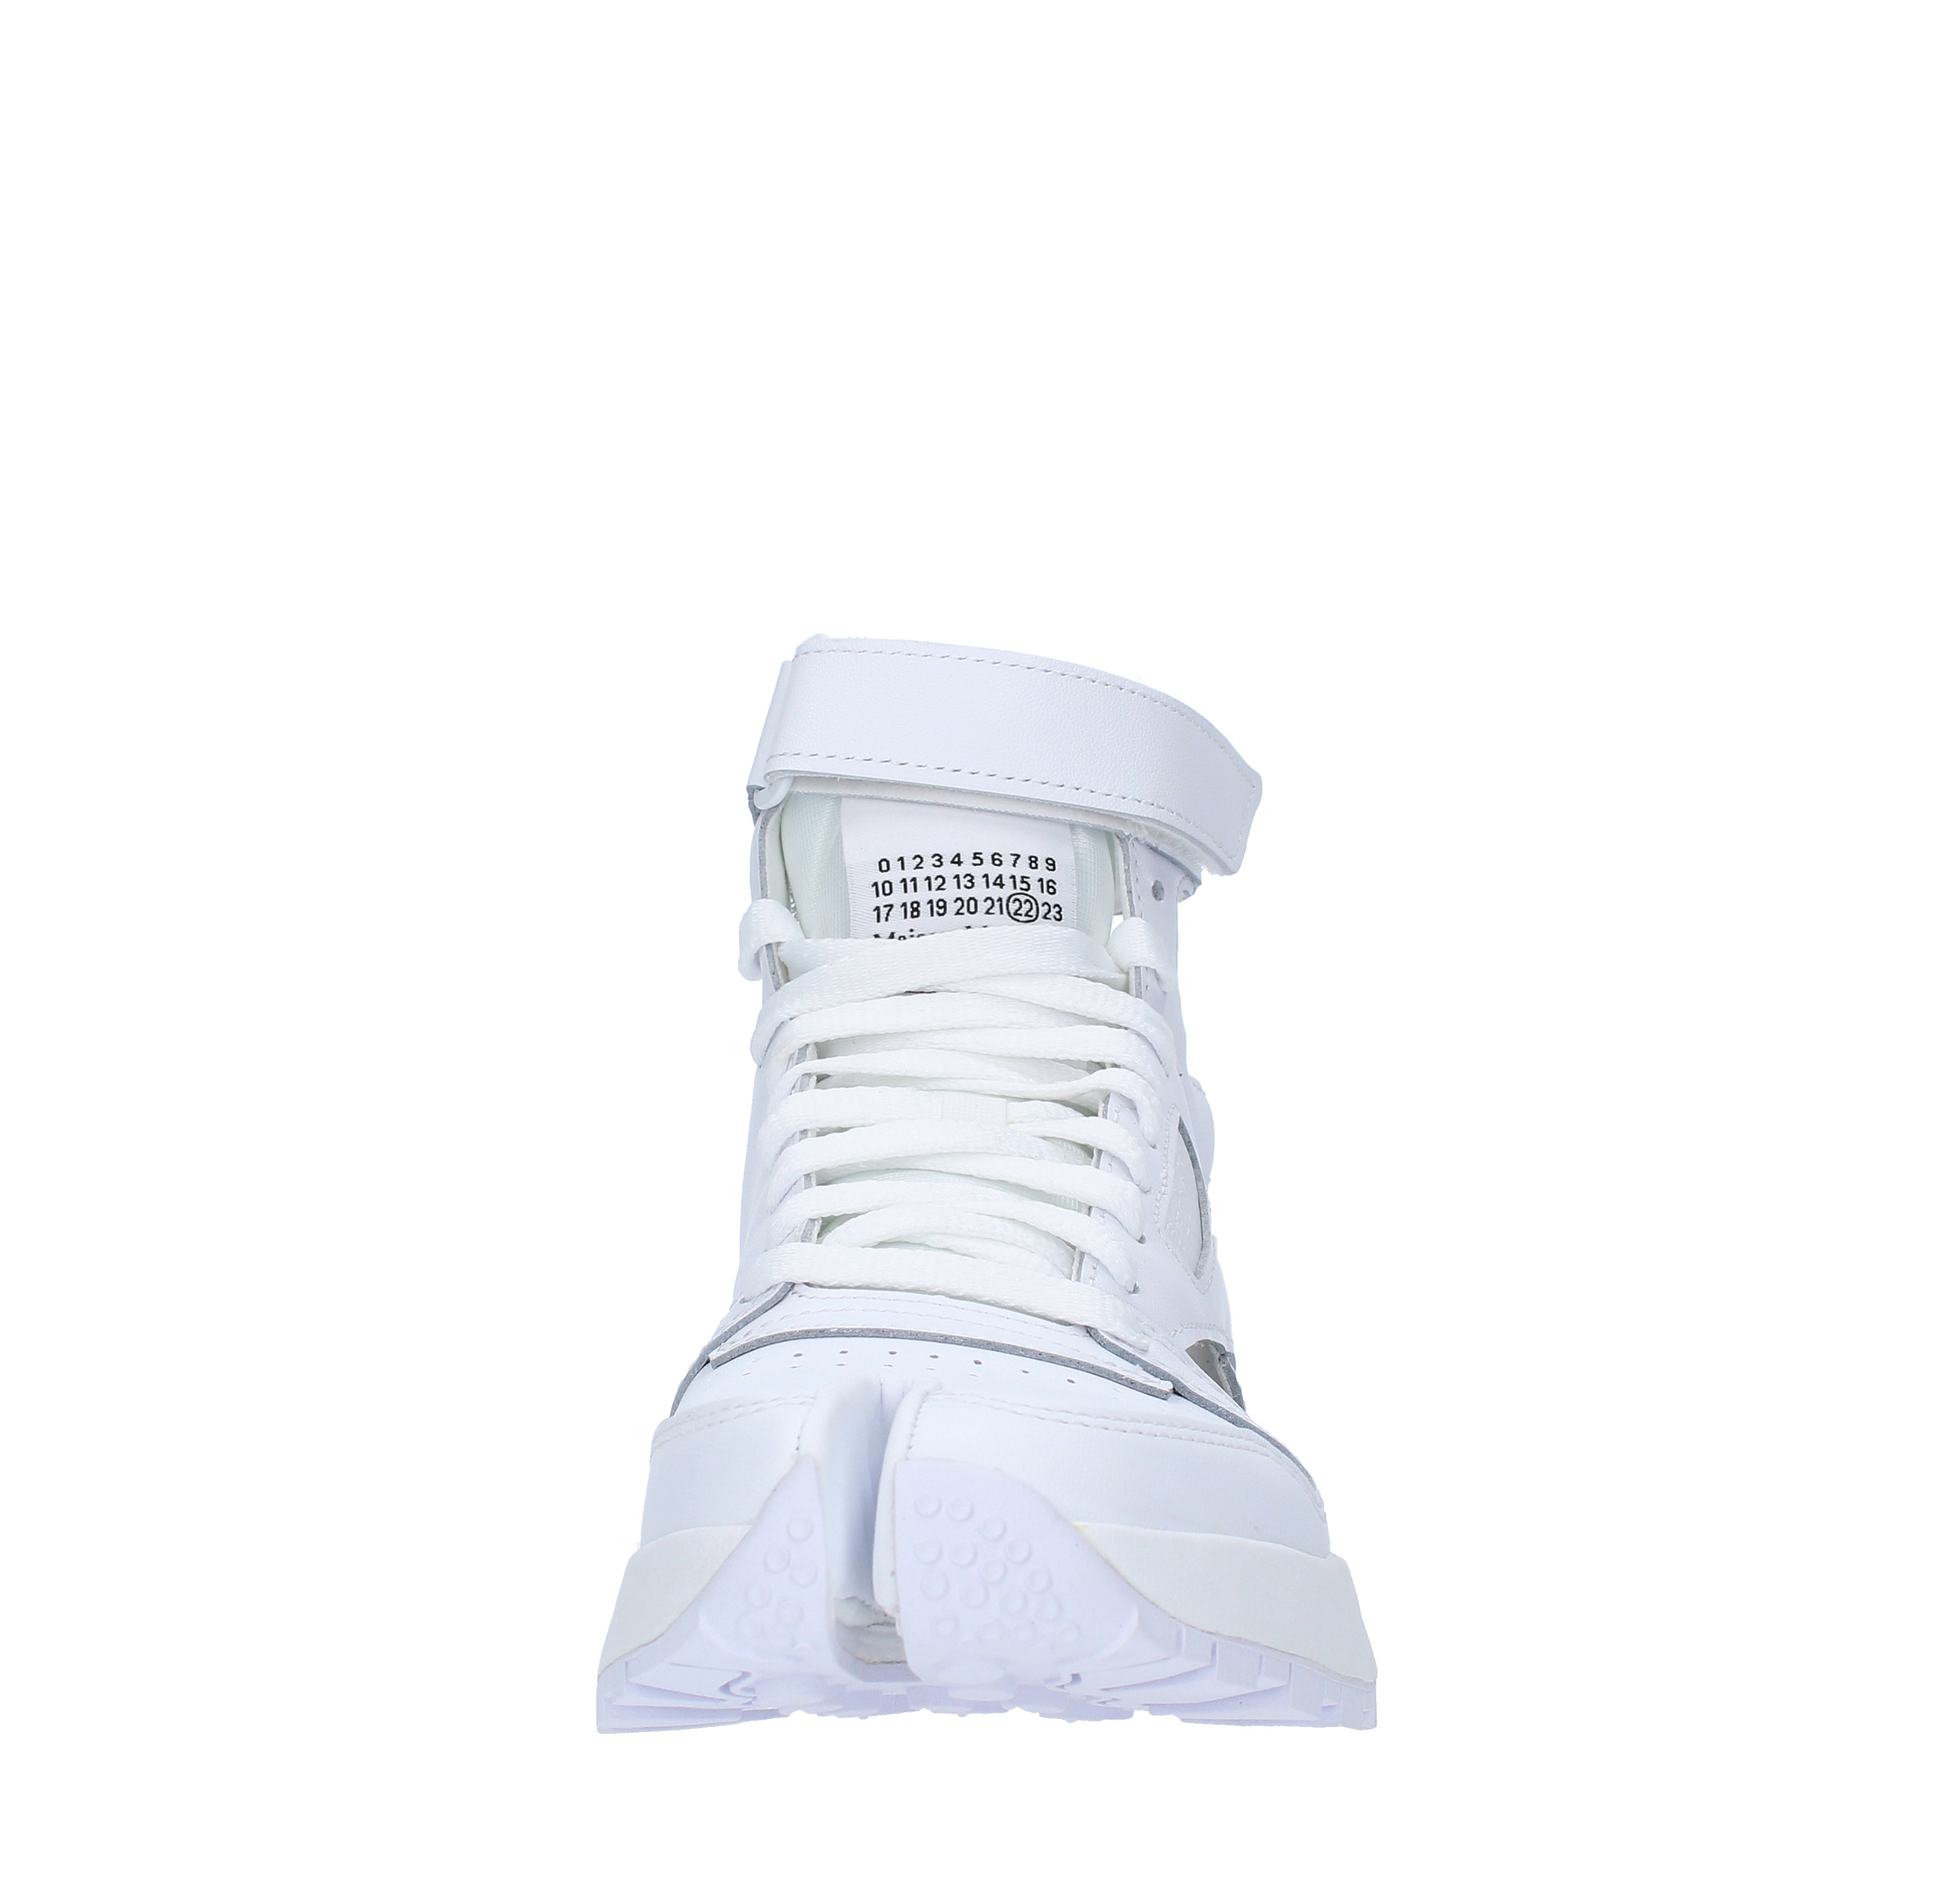 High top sneakers made of leather and fabric MAISON MARGIELA x REEBOK | S39WS0099BIANCO